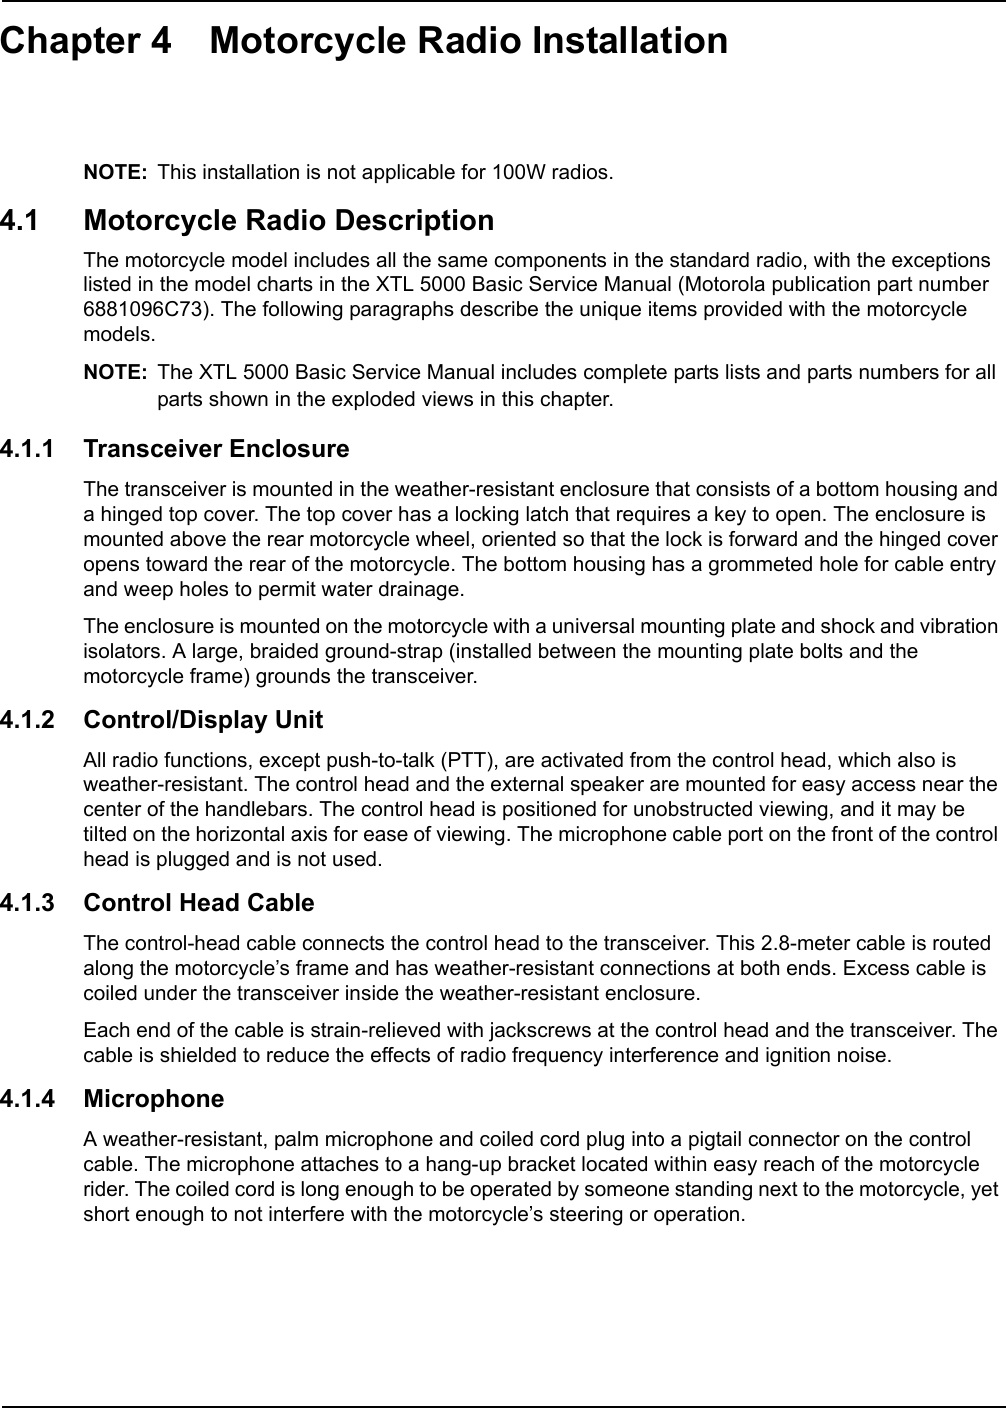 Chapter 4 Motorcycle Radio InstallationNOTE: This installation is not applicable for 100W radios.4.1 Motorcycle Radio DescriptionThe motorcycle model includes all the same components in the standard radio, with the exceptions listed in the model charts in the XTL 5000 Basic Service Manual (Motorola publication part number 6881096C73). The following paragraphs describe the unique items provided with the motorcycle models. NOTE: The XTL 5000 Basic Service Manual includes complete parts lists and parts numbers for all parts shown in the exploded views in this chapter.4.1.1 Transceiver EnclosureThe transceiver is mounted in the weather-resistant enclosure that consists of a bottom housing and a hinged top cover. The top cover has a locking latch that requires a key to open. The enclosure is mounted above the rear motorcycle wheel, oriented so that the lock is forward and the hinged cover opens toward the rear of the motorcycle. The bottom housing has a grommeted hole for cable entry and weep holes to permit water drainage.The enclosure is mounted on the motorcycle with a universal mounting plate and shock and vibration isolators. A large, braided ground-strap (installed between the mounting plate bolts and the motorcycle frame) grounds the transceiver.4.1.2 Control/Display UnitAll radio functions, except push-to-talk (PTT), are activated from the control head, which also is weather-resistant. The control head and the external speaker are mounted for easy access near the center of the handlebars. The control head is positioned for unobstructed viewing, and it may be tilted on the horizontal axis for ease of viewing. The microphone cable port on the front of the control head is plugged and is not used. 4.1.3 Control Head CableThe control-head cable connects the control head to the transceiver. This 2.8-meter cable is routed along the motorcycle’s frame and has weather-resistant connections at both ends. Excess cable is coiled under the transceiver inside the weather-resistant enclosure.Each end of the cable is strain-relieved with jackscrews at the control head and the transceiver. The cable is shielded to reduce the effects of radio frequency interference and ignition noise.4.1.4 MicrophoneA weather-resistant, palm microphone and coiled cord plug into a pigtail connector on the control cable. The microphone attaches to a hang-up bracket located within easy reach of the motorcycle rider. The coiled cord is long enough to be operated by someone standing next to the motorcycle, yet short enough to not interfere with the motorcycle’s steering or operation.